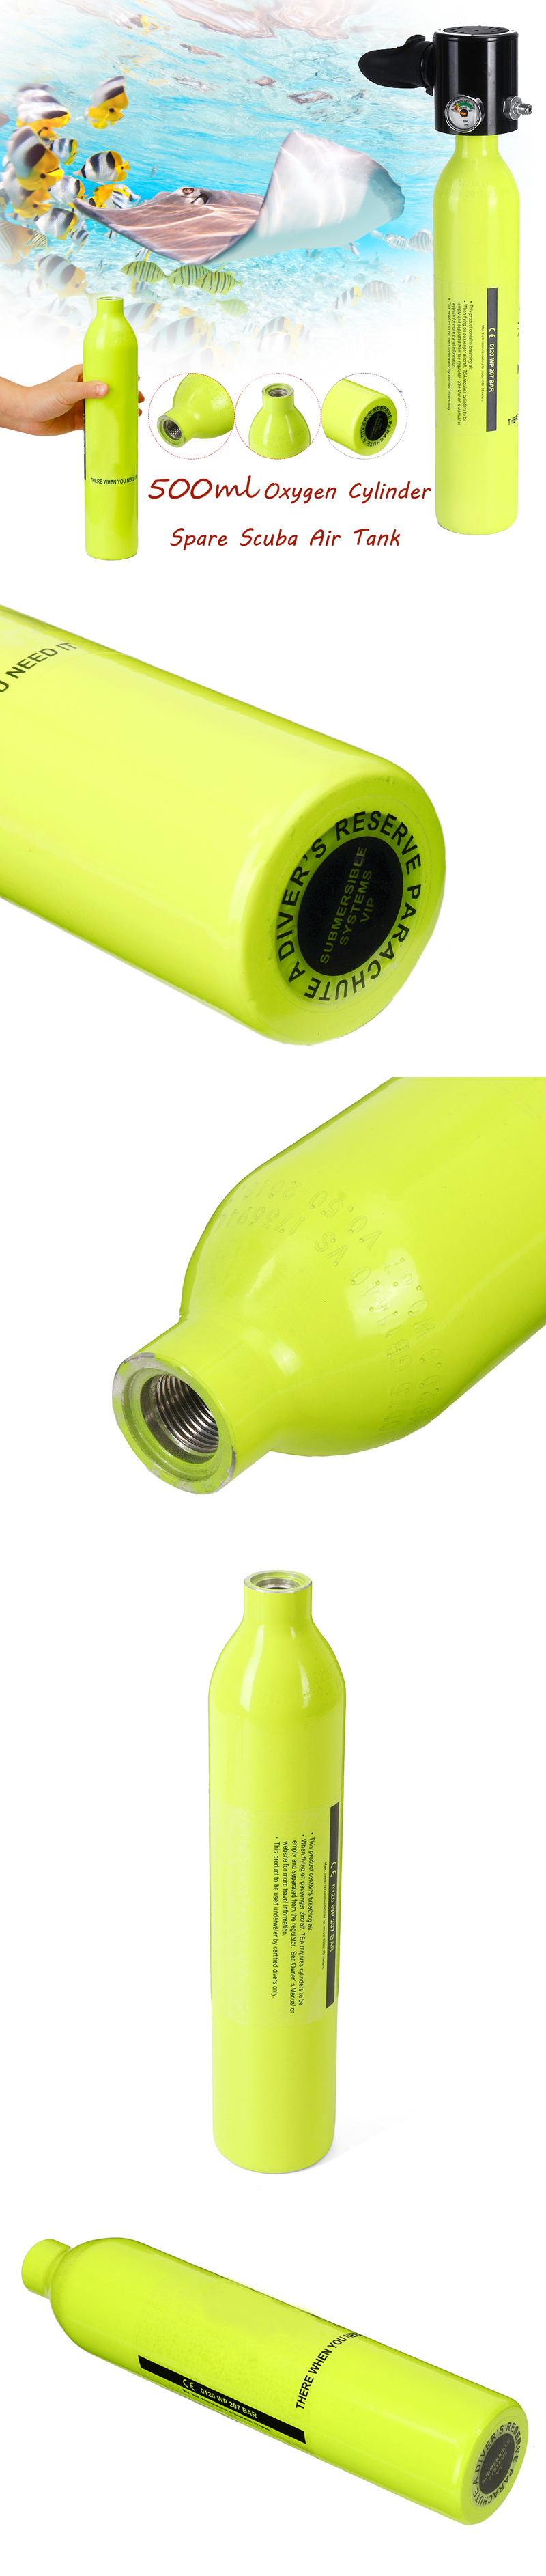 05L-Oxygen-Spare-Scuba-Air-Tank-Underwater-Mini-Cylinder-Breathing-Bottle-Diving-Equipment-1438309